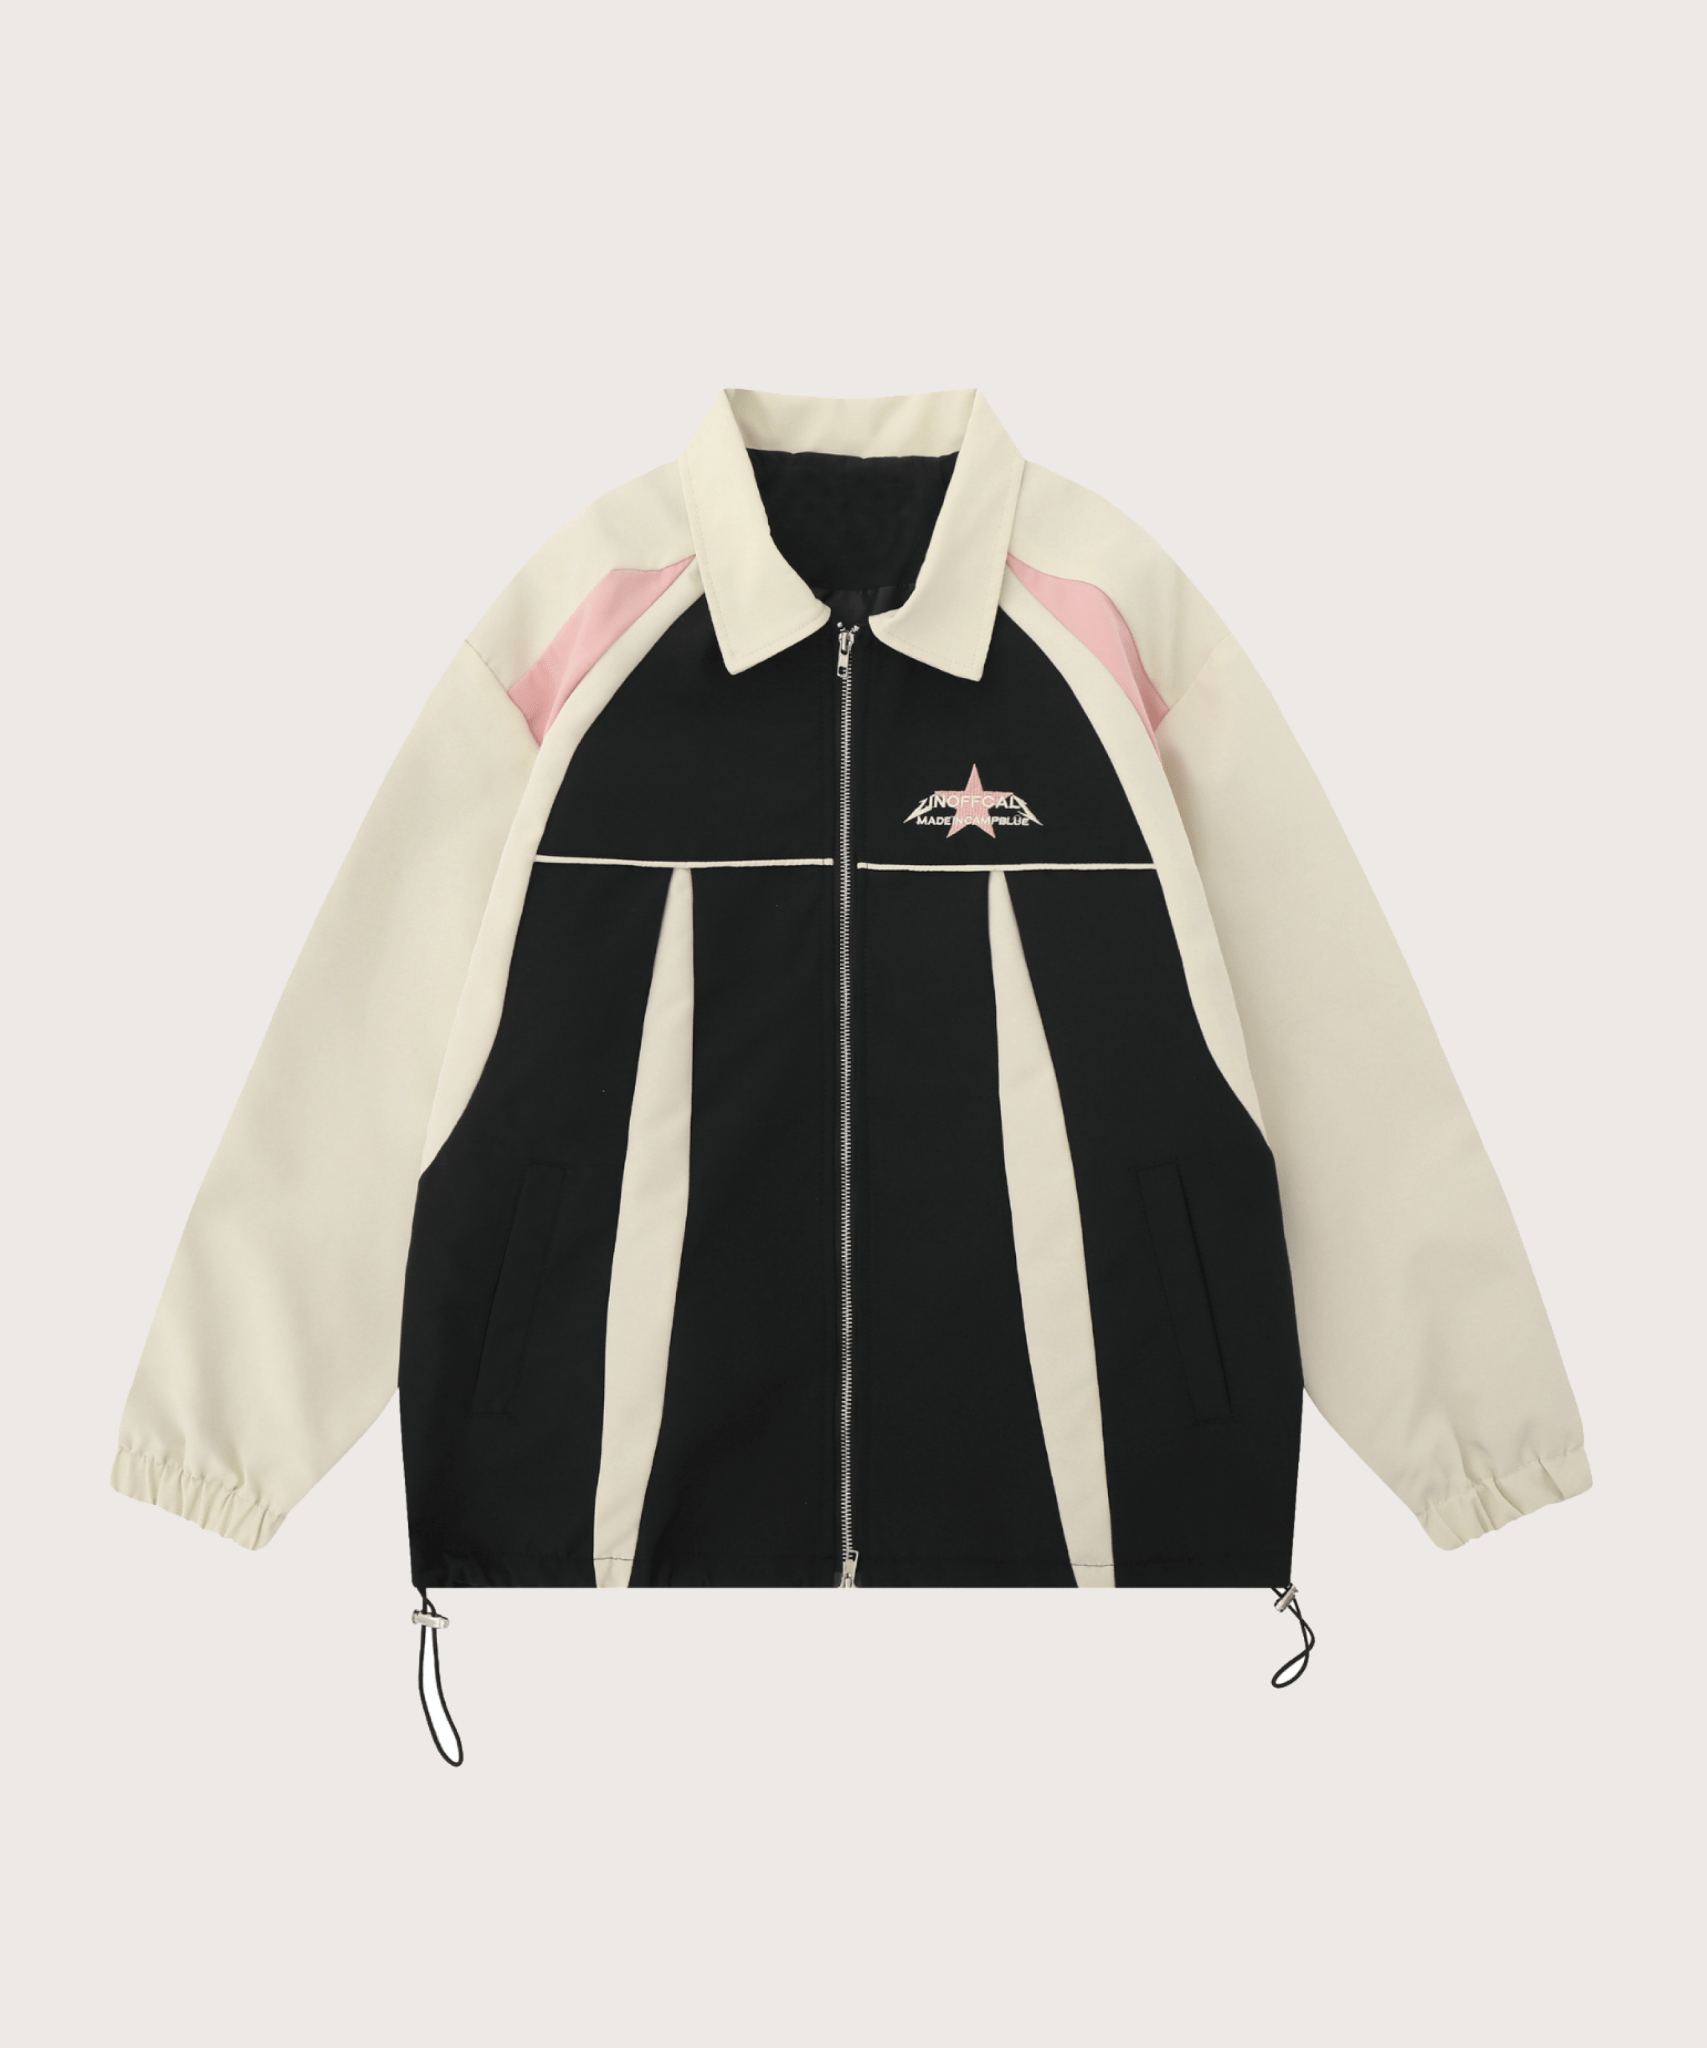 Contrast Embroidered Jacket